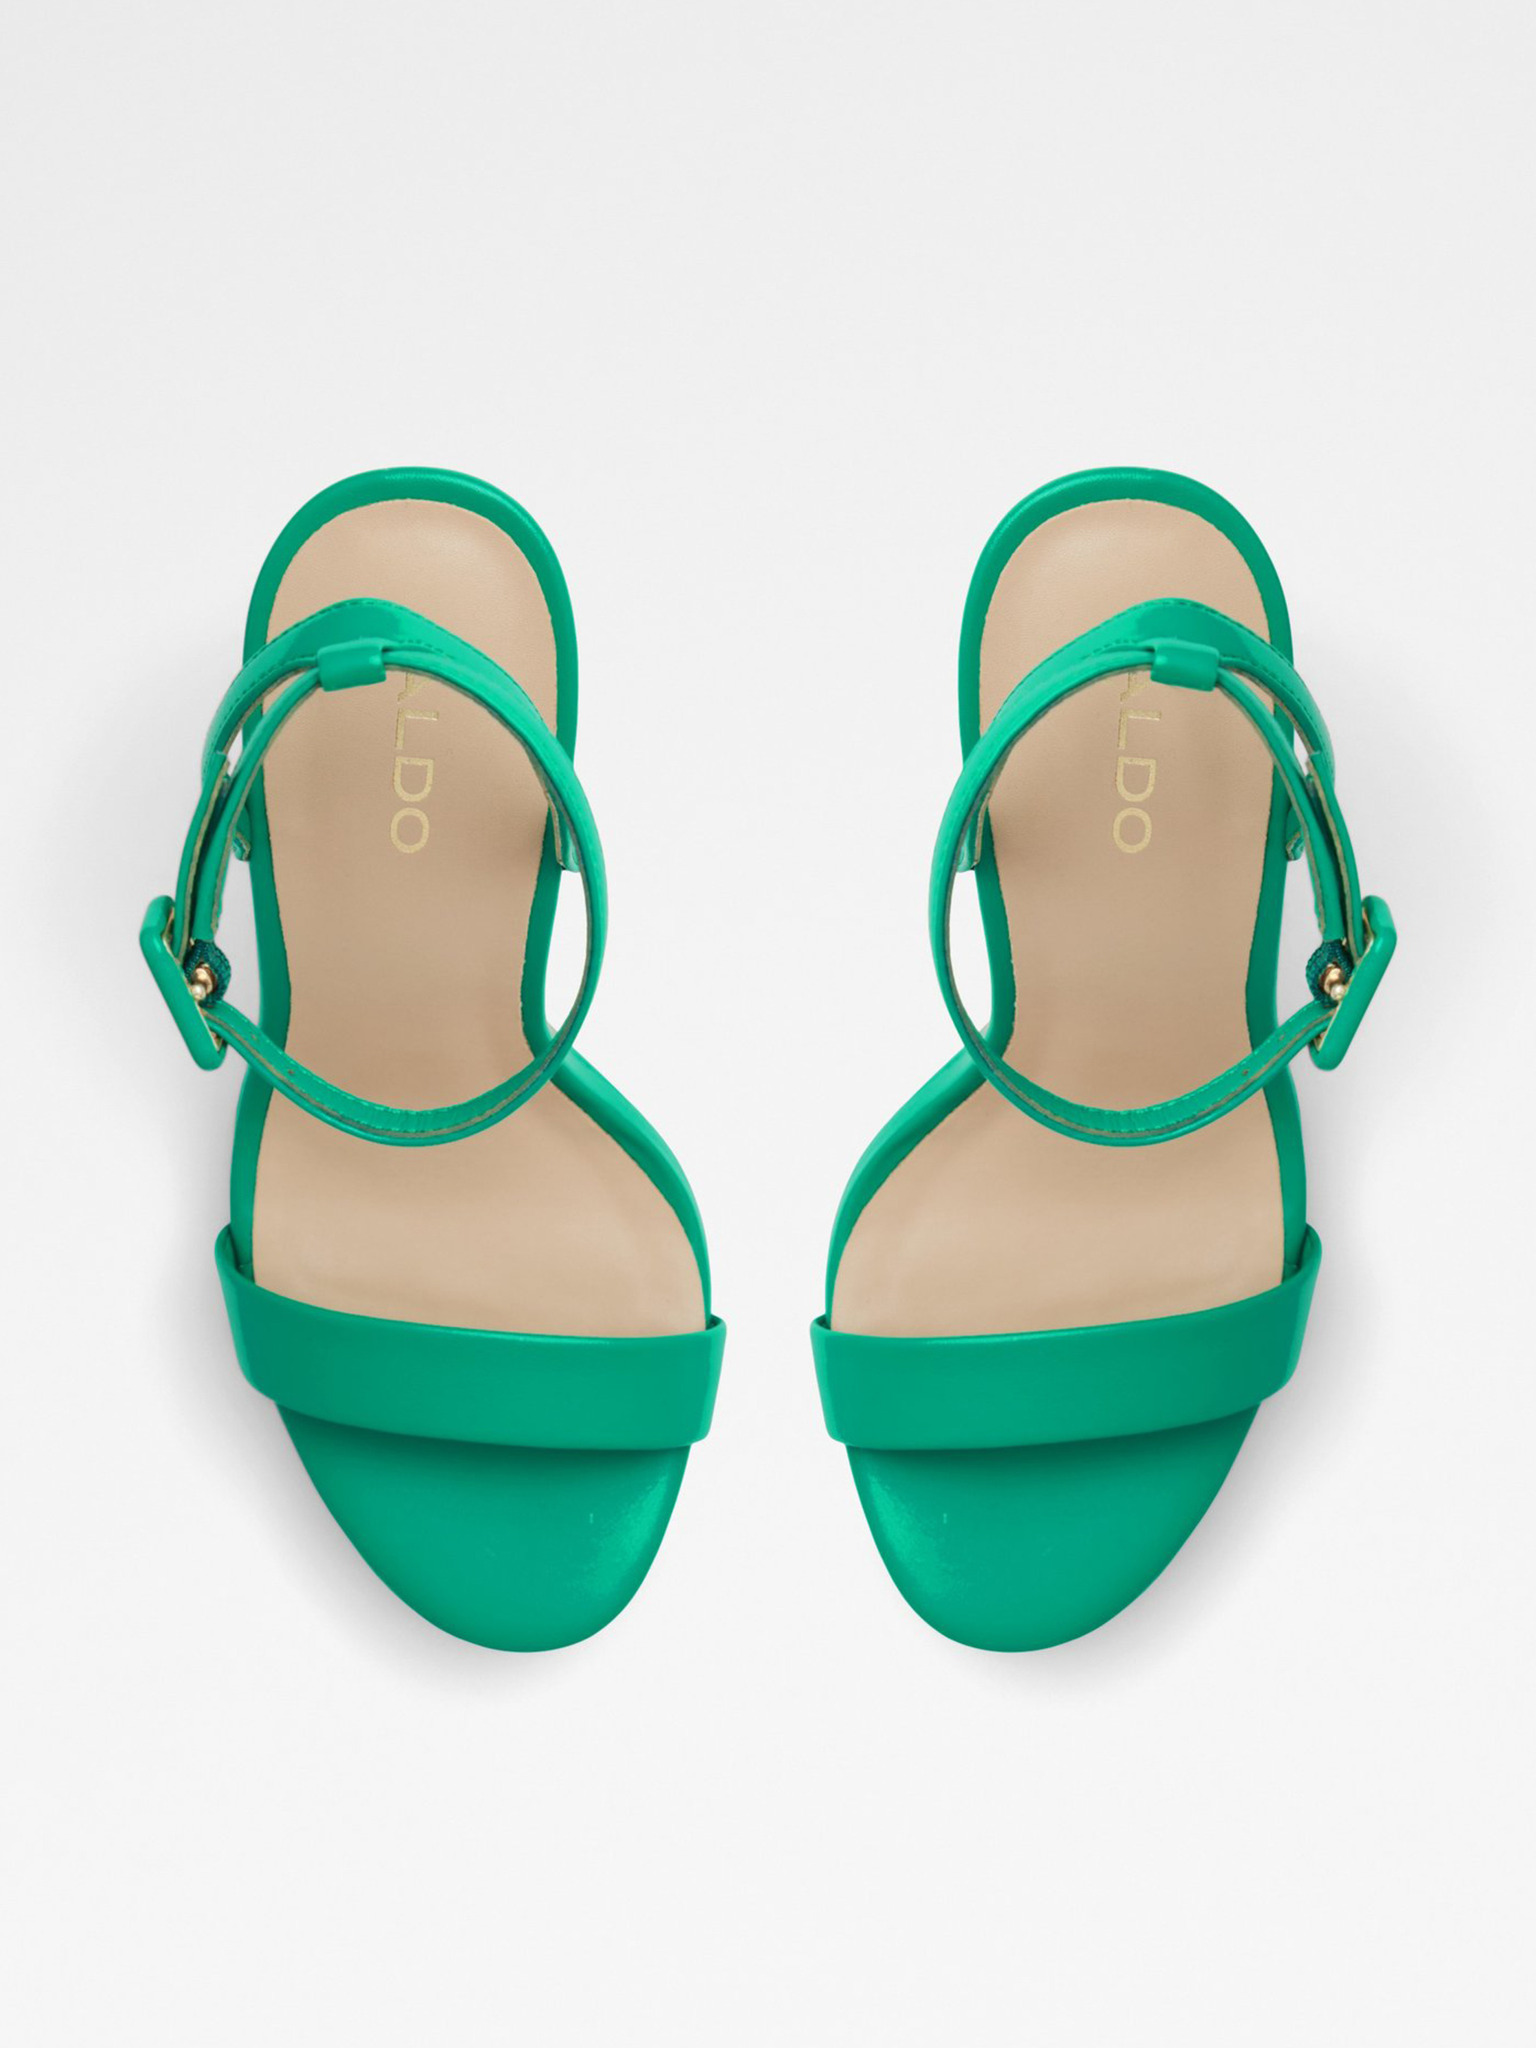 New Look satin and diamante mid heel shoes with ankle strap detail in  bright green | ASOS